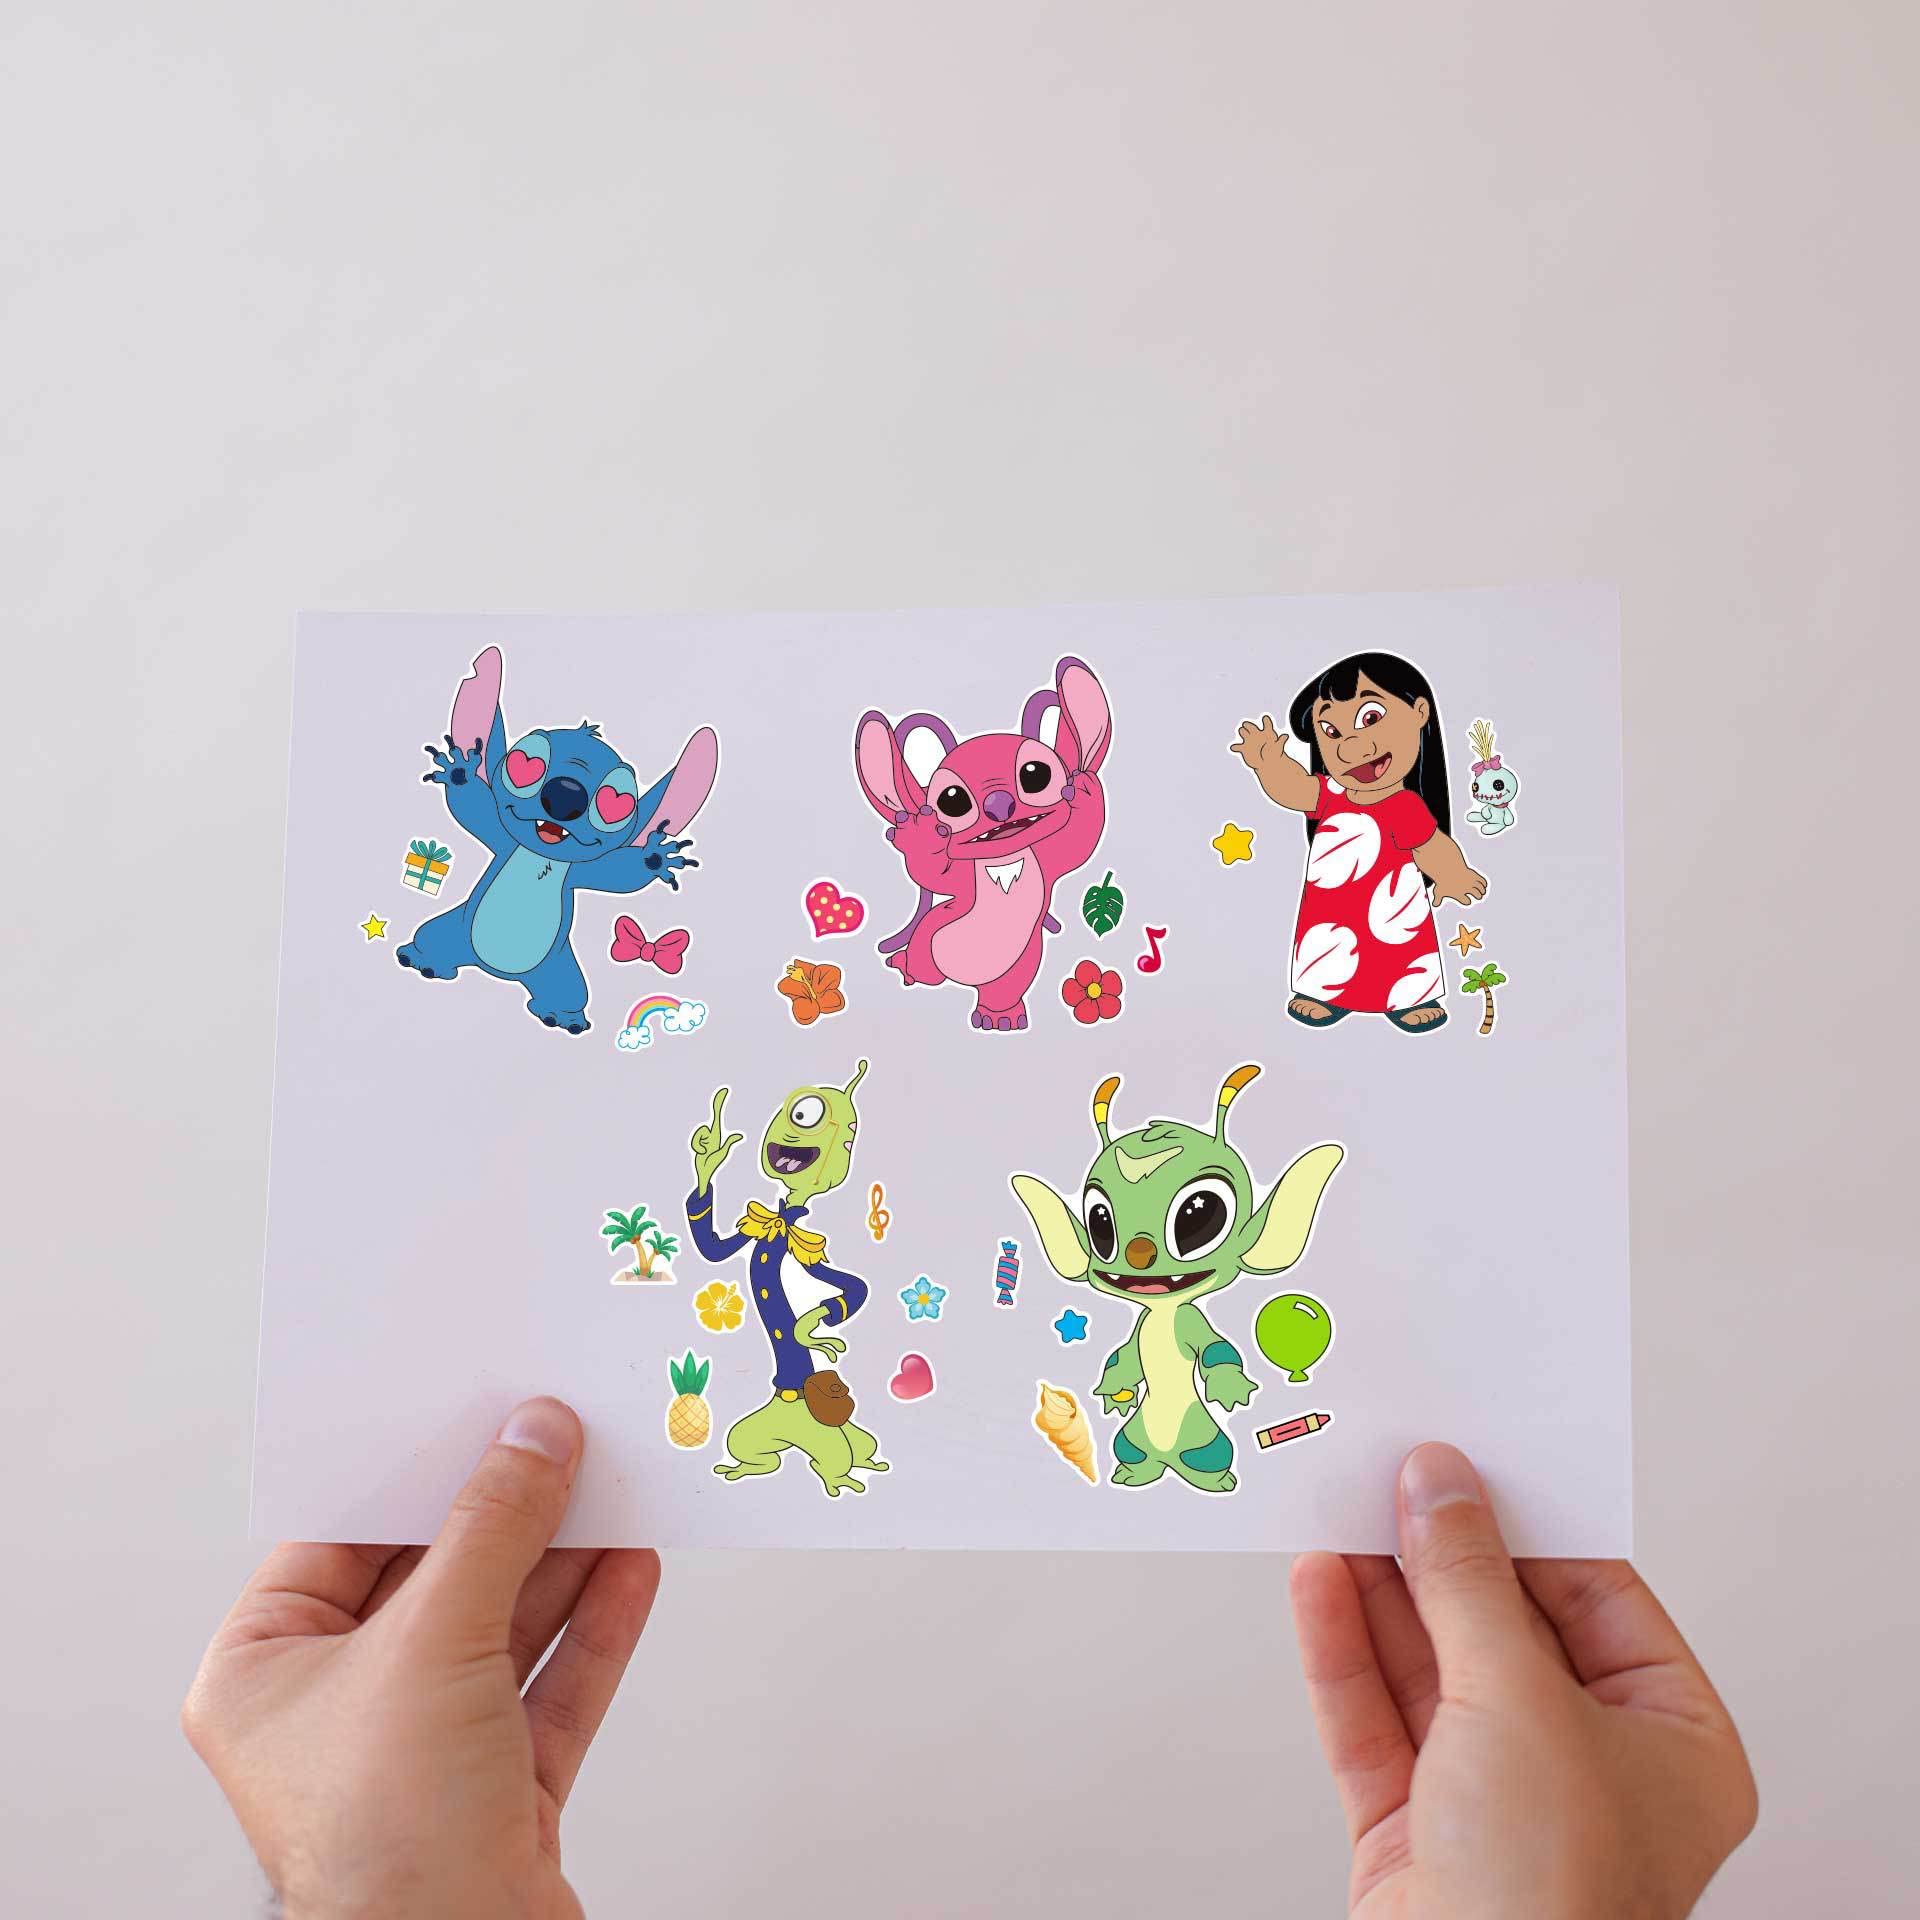 16 Pcs Stitch Face Stickers Sheets for Children Party Bags, Make Your Own Stickers Characters DIY Stickers for Kids Party Favor Supplies Craft